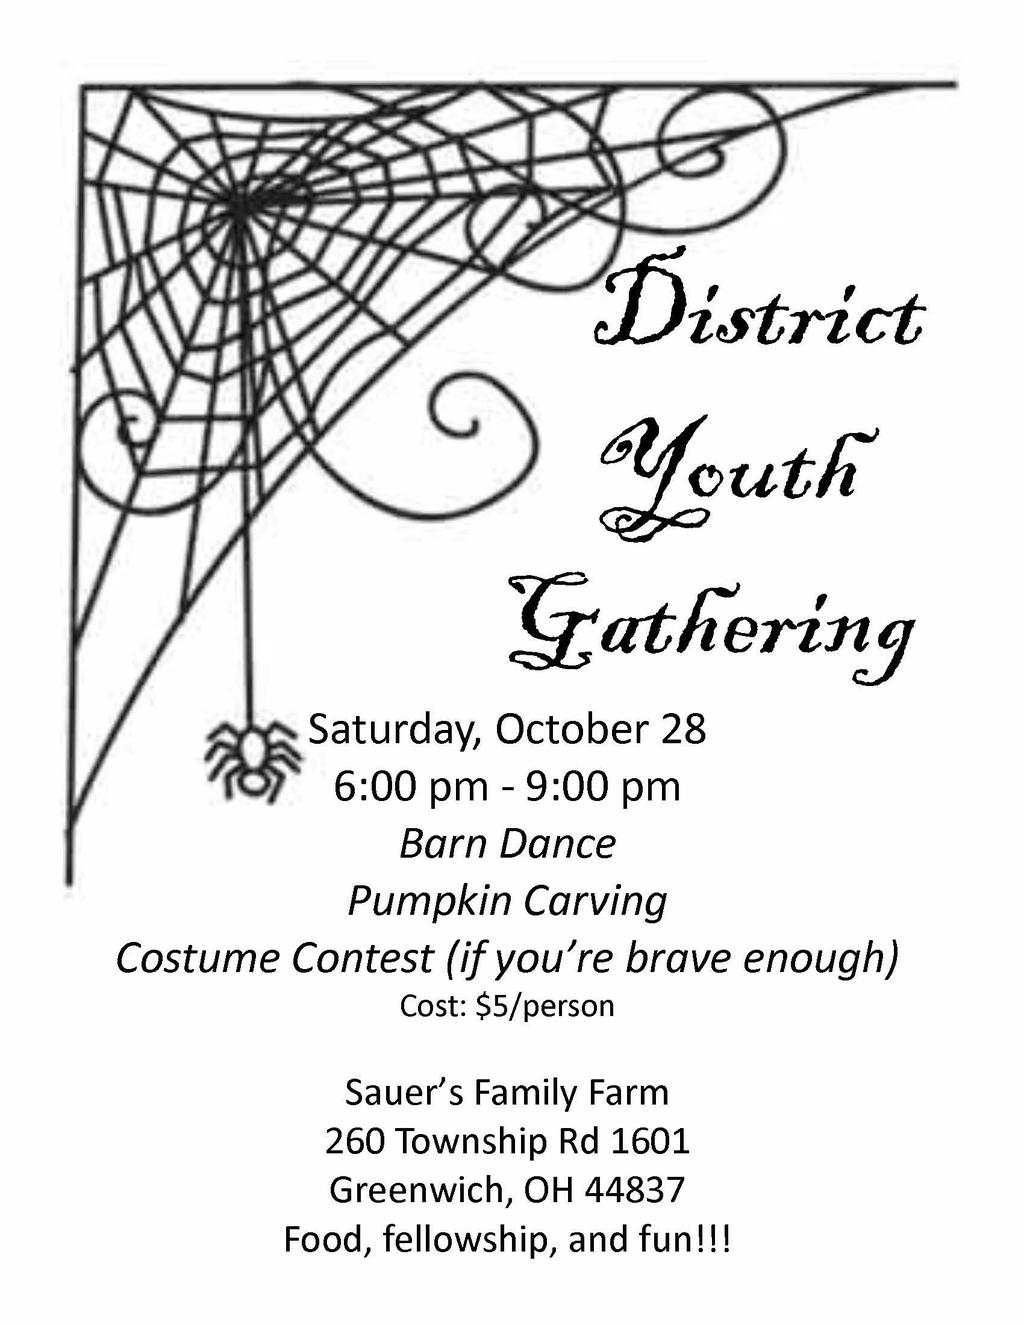 District Youth Council September 17 2-4pm Business Meeting Norwalk First UMC 60 W Main Street, Norwalk October 28 6-9pm District Youth Gathering Sauer s Family Farm 260 Twp Rd 1601, Greenwich